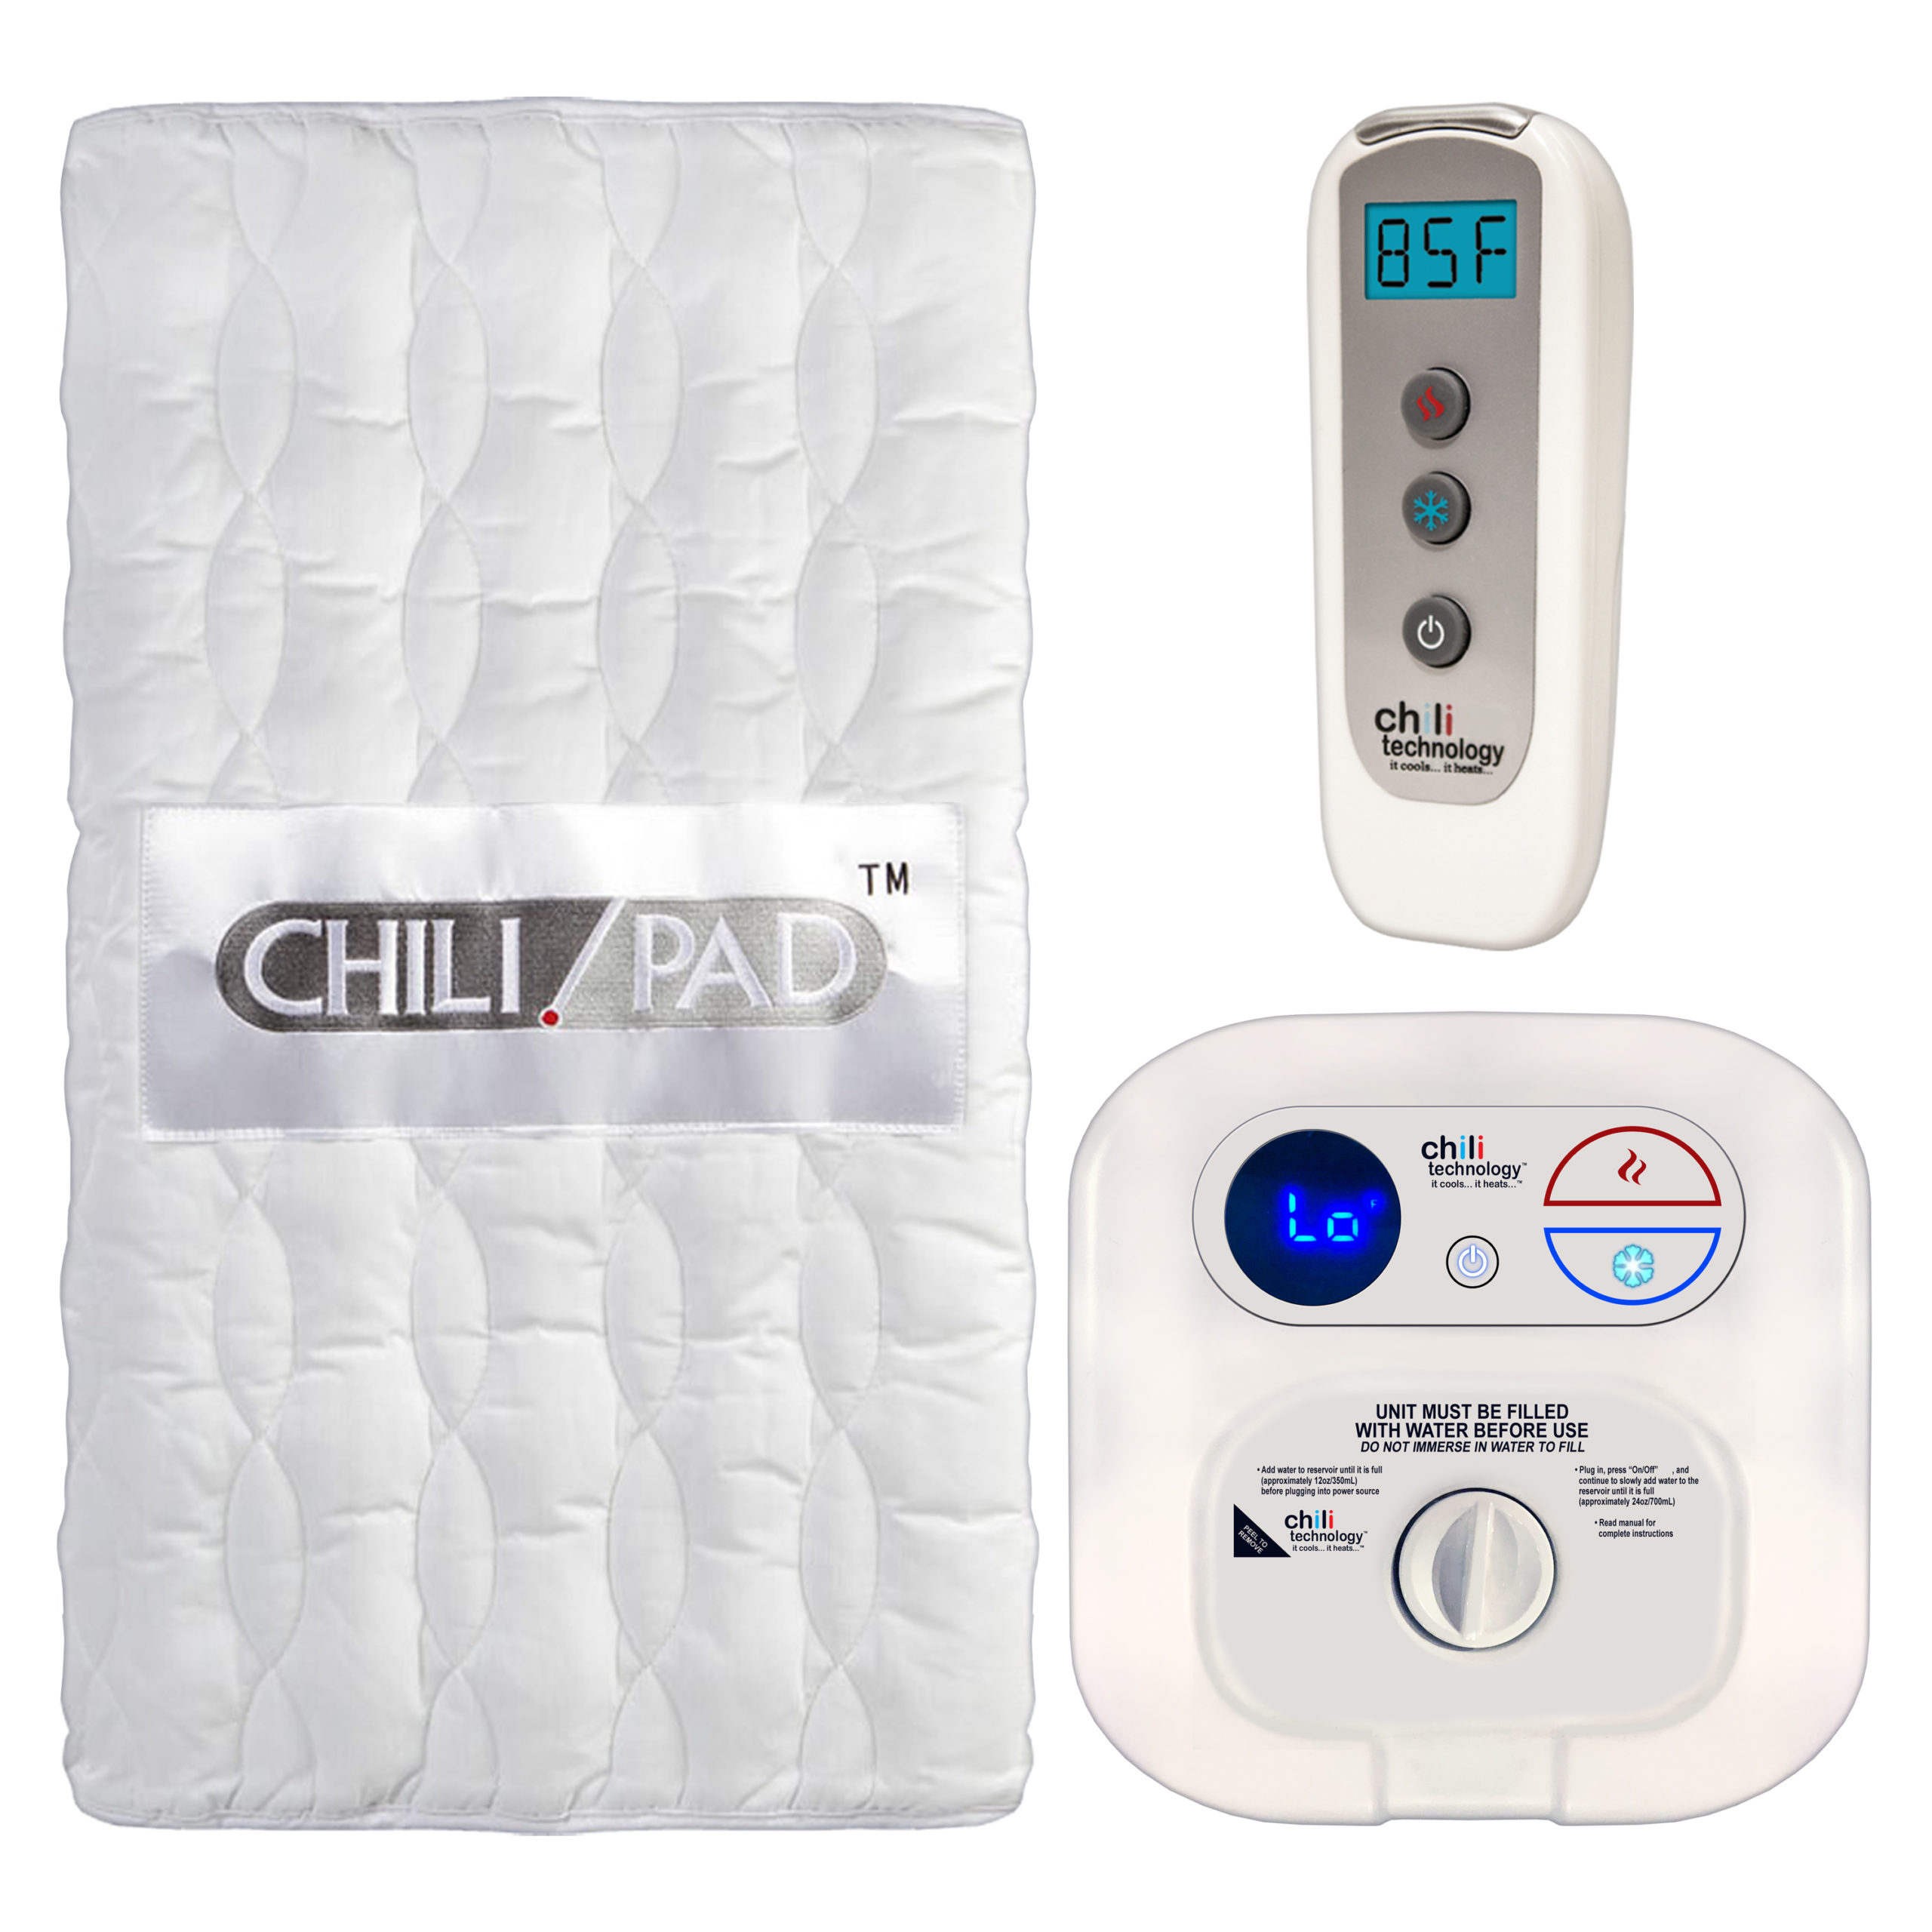 I Keep Having Night Sweats - Chilipad|Temperature|Mattress|Cube|Sleep|Bed|Water|System|Pad|Ooler|Control|Unit|Night|Bedjet|Technology|Side|Air|Product|Review|Body|Time|Degrees|Noise|Price|Pod|Tubes|Heat|Device|Cooling|Room|King|App|Features|Size|Cover|Sleepers|Sheets|Energy|Warranty|Quality|Mattress Pad|Control Unit|Cube Sleep System|Sleep Pod|Distilled Water|Remote Control|Sleep System|Desired Temperature|Water Tank|Chilipad Cube|Chili Technology|Deep Sleep|Pro Cover|Ooler Sleep System|Hydrogen Peroxide|Cool Mesh|Sleep Temperature|Fitted Sheet|Pod Pro|Sleep Quality|Smartphone App|Sleep Systems|Chilipad Sleep System|New Mattress|Sleep Trial|Full Refund|Mattress Topper|Body Heat|Air Flow|Chilipad Review